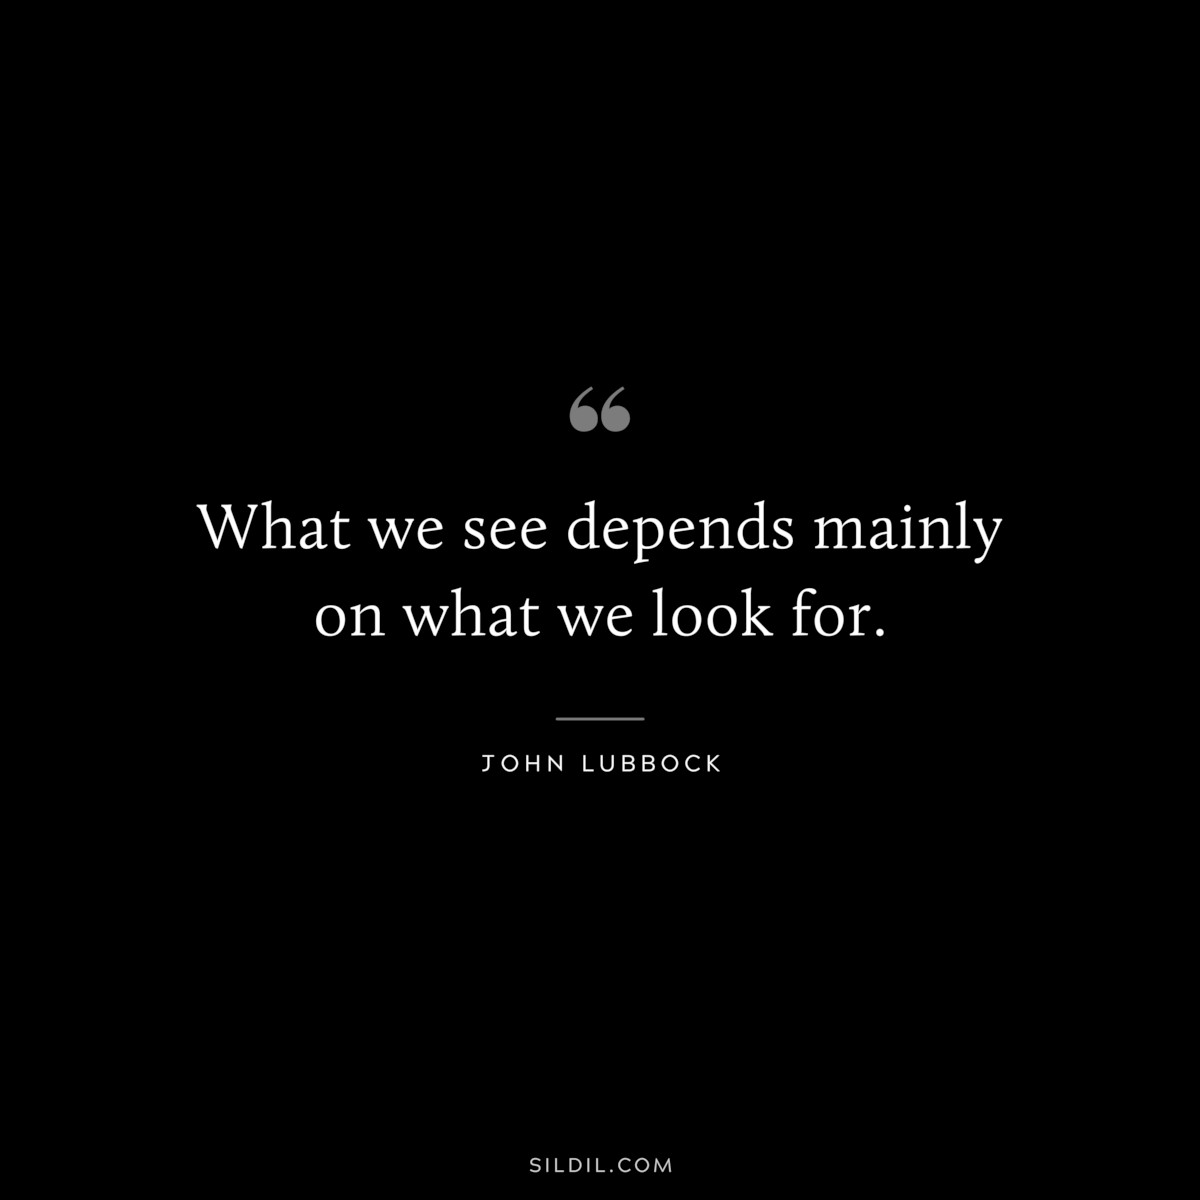 What we see depends mainly on what we look for. ― John Lubbock